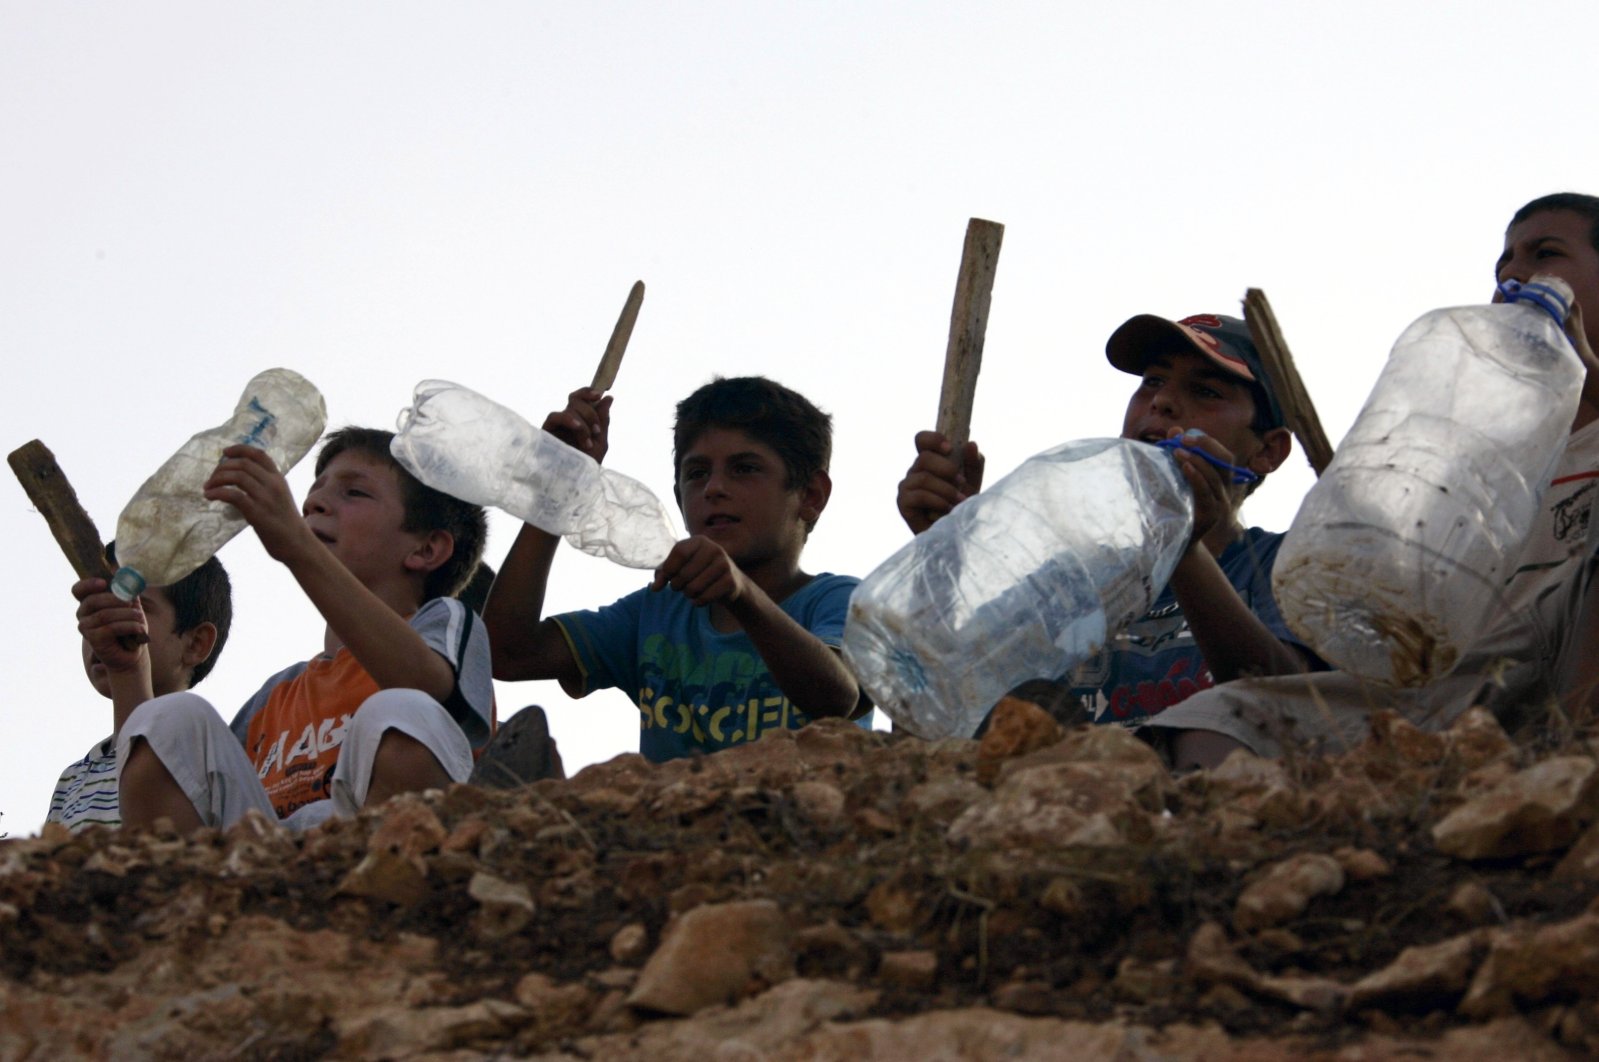 Lebanese boys cheer during a soccer training session organized by Italian United Nations Interim Force in Lebanon (UNIFIL) soldiers for the children of Zib'in village in south Lebanon, Aug. 24, 2007. (Reuters Photo)